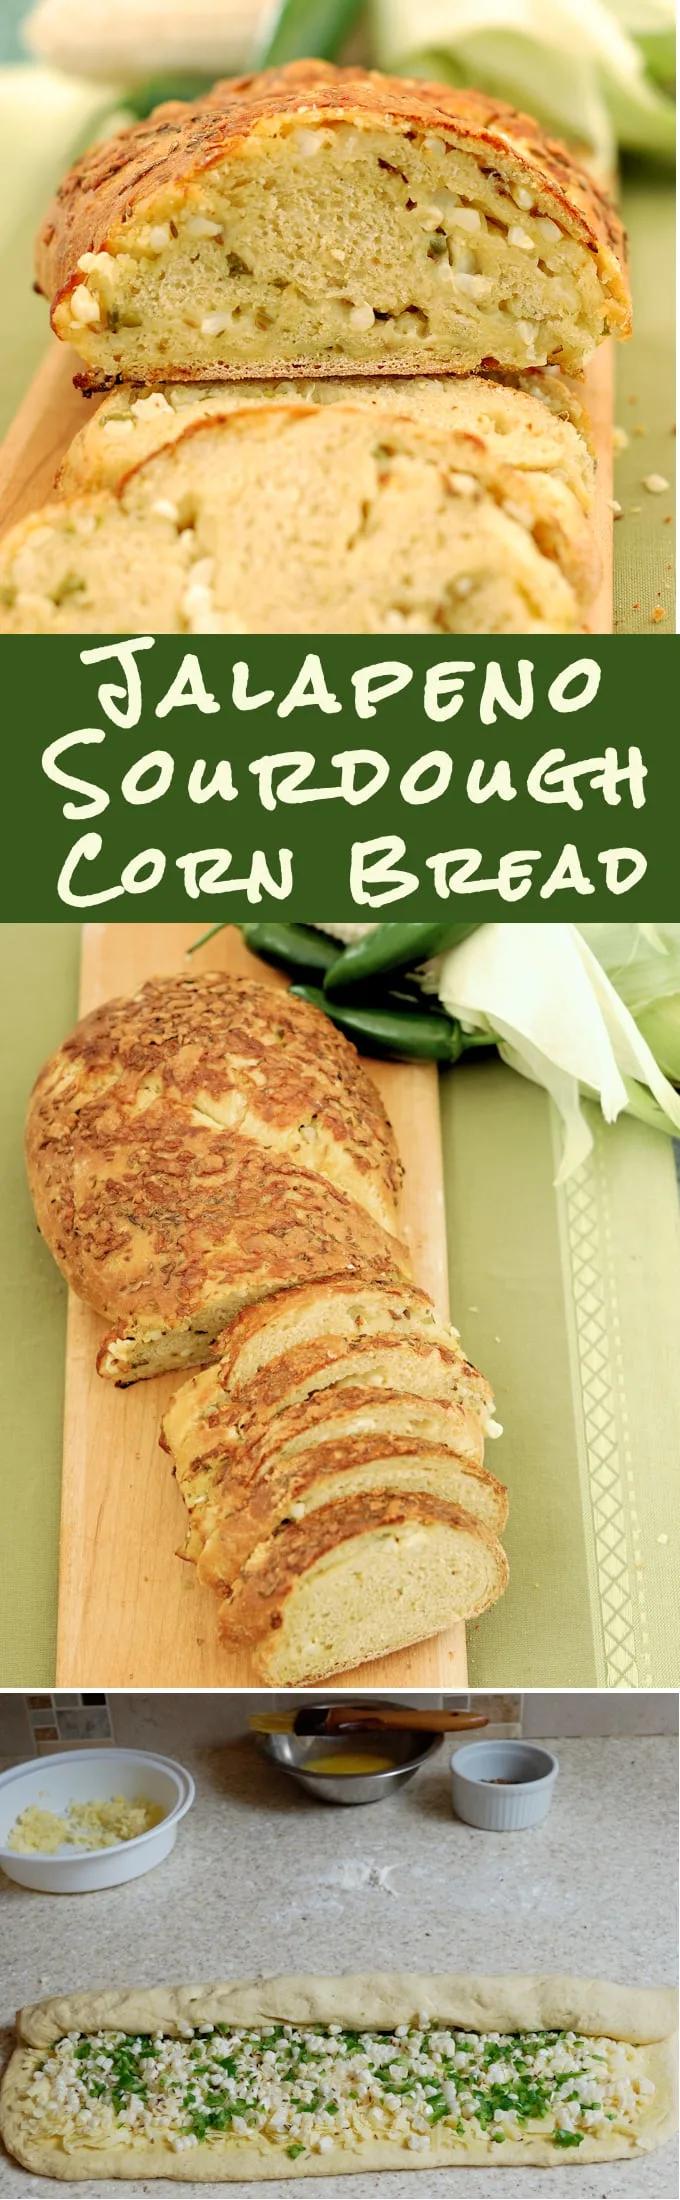 Spice up your sourdough bread with Jalapeno peppers. This hearty loaf needs no condiments. It's a snack-worthy bread. #Breadbakers